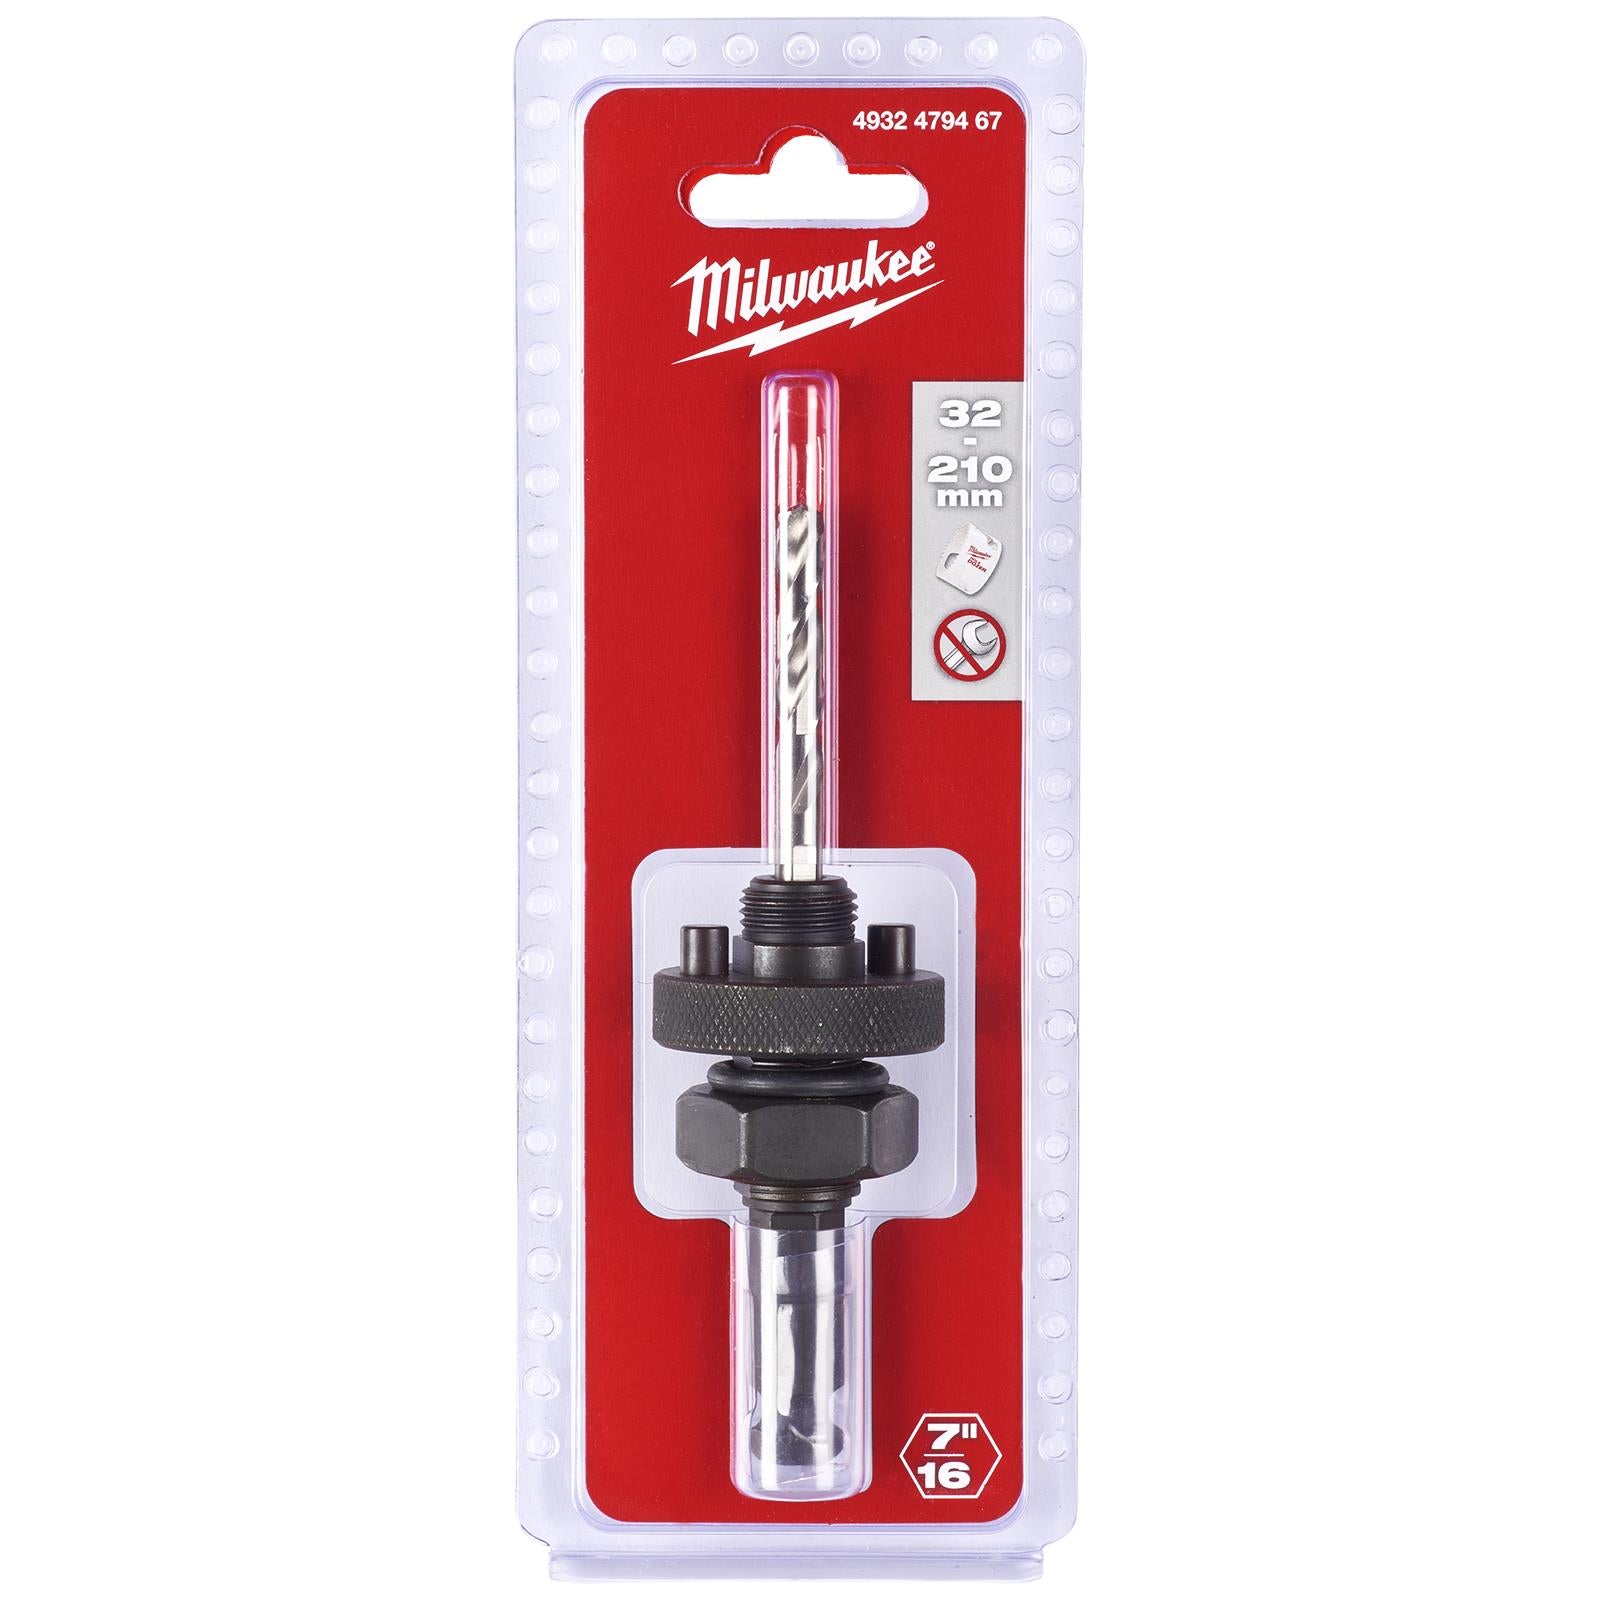 Milwaukee Holesaw Arbor 32-210mm 9.5mm Hex Shank Hole Saw Attachment